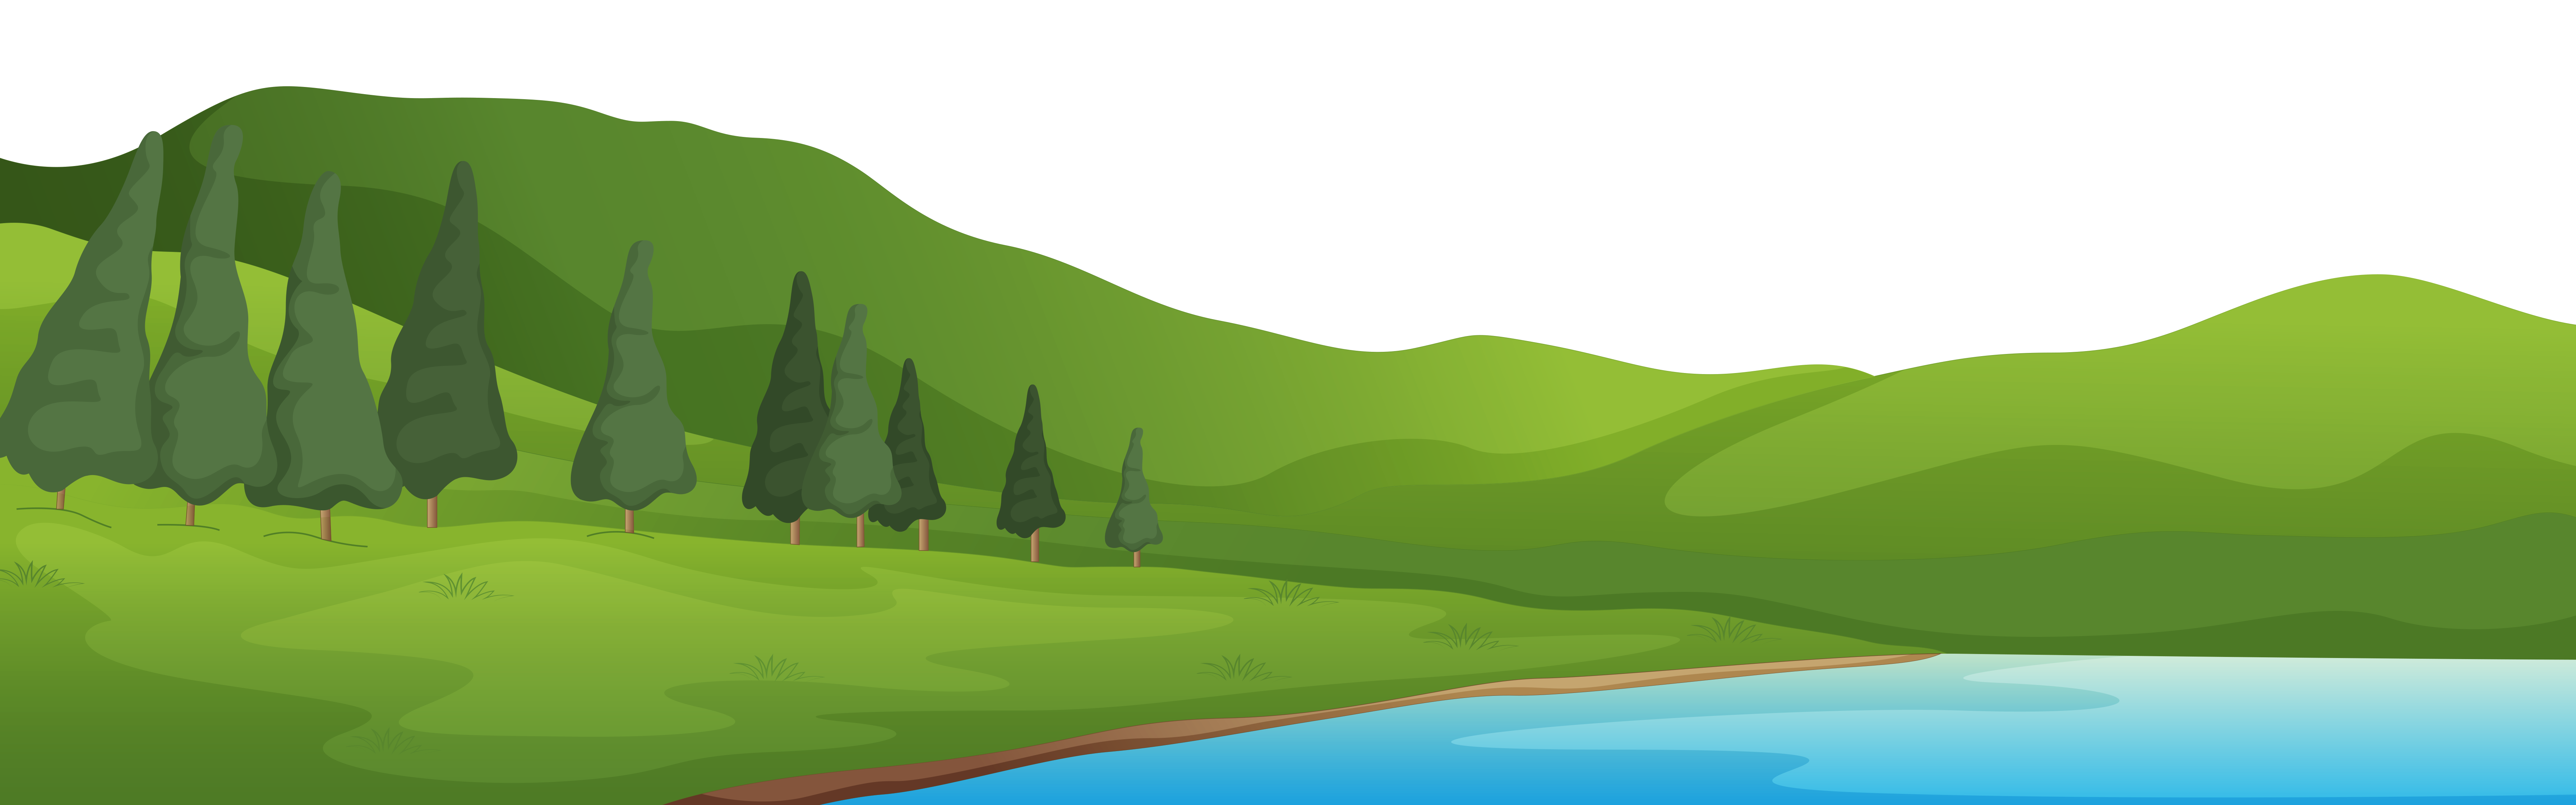 Hill clipart ground. Grass mountain and lake